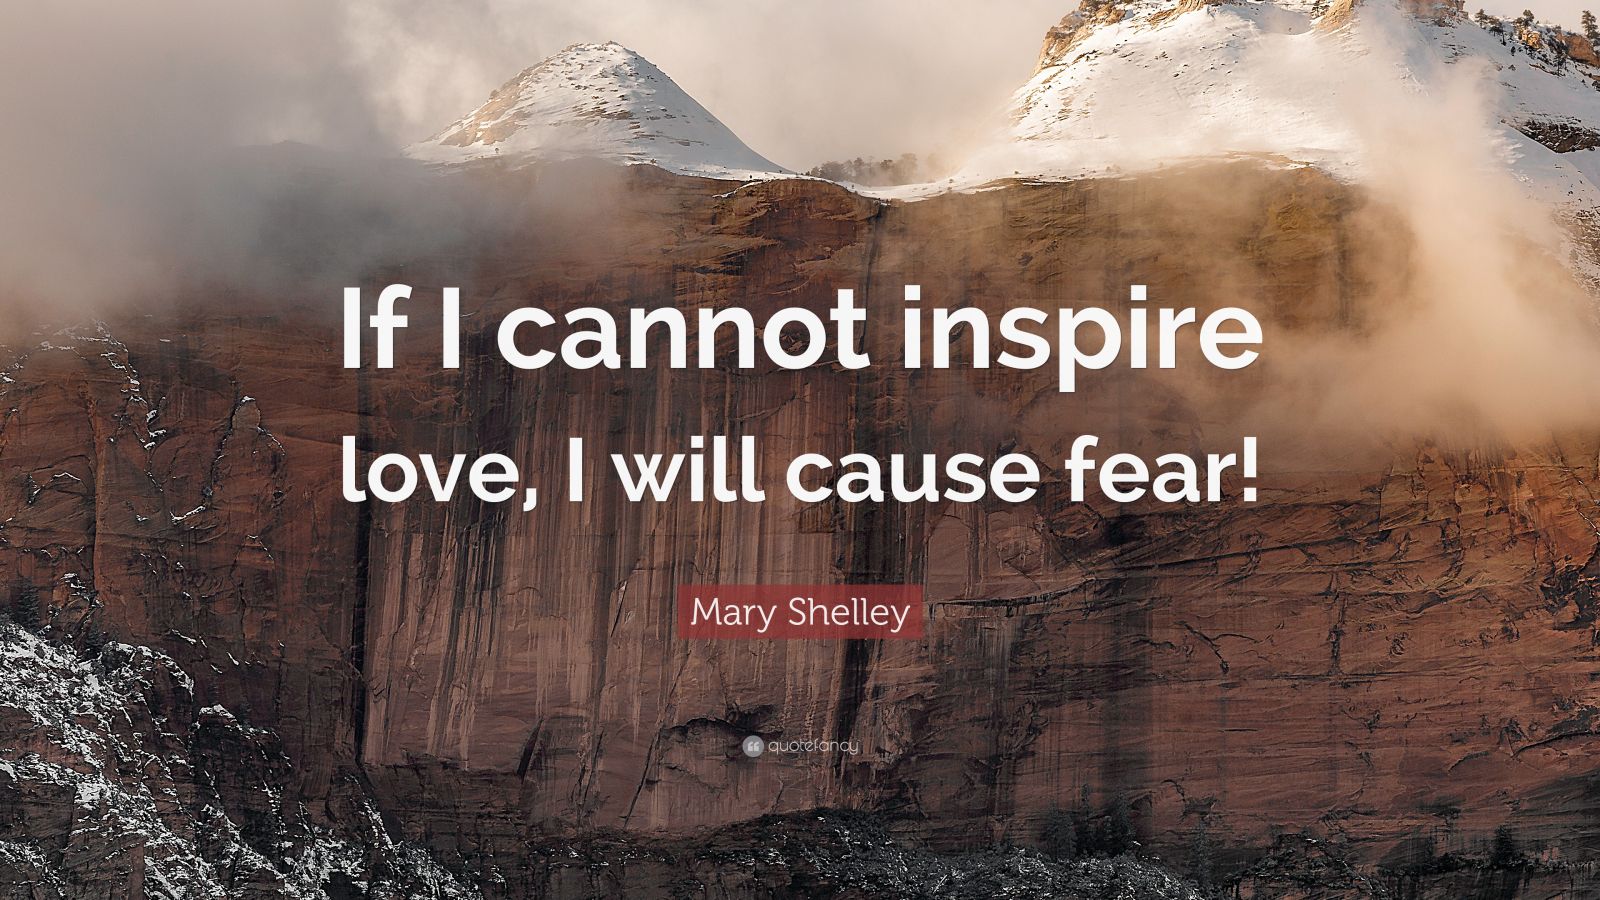 The Fear For Him By Mary Shelley